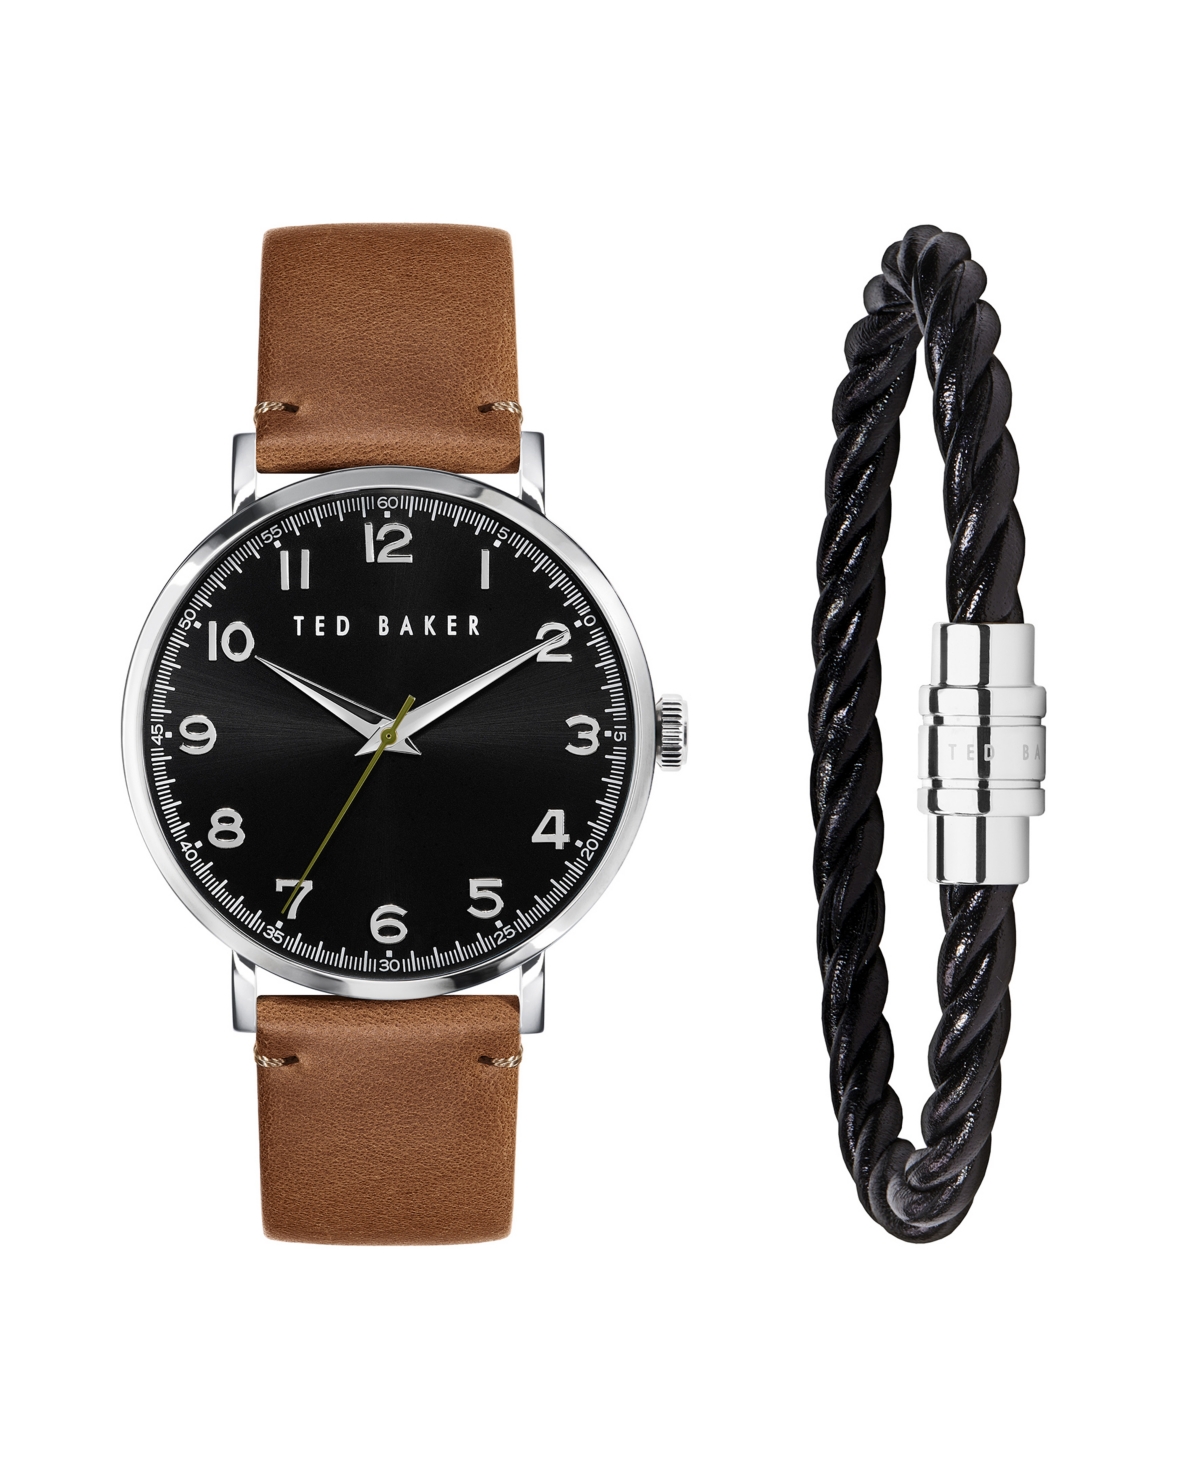 Men's Phylipa Brown Leather Strap Watch 43mm and Bracelet Gift Set, 2 Pieces - Brown